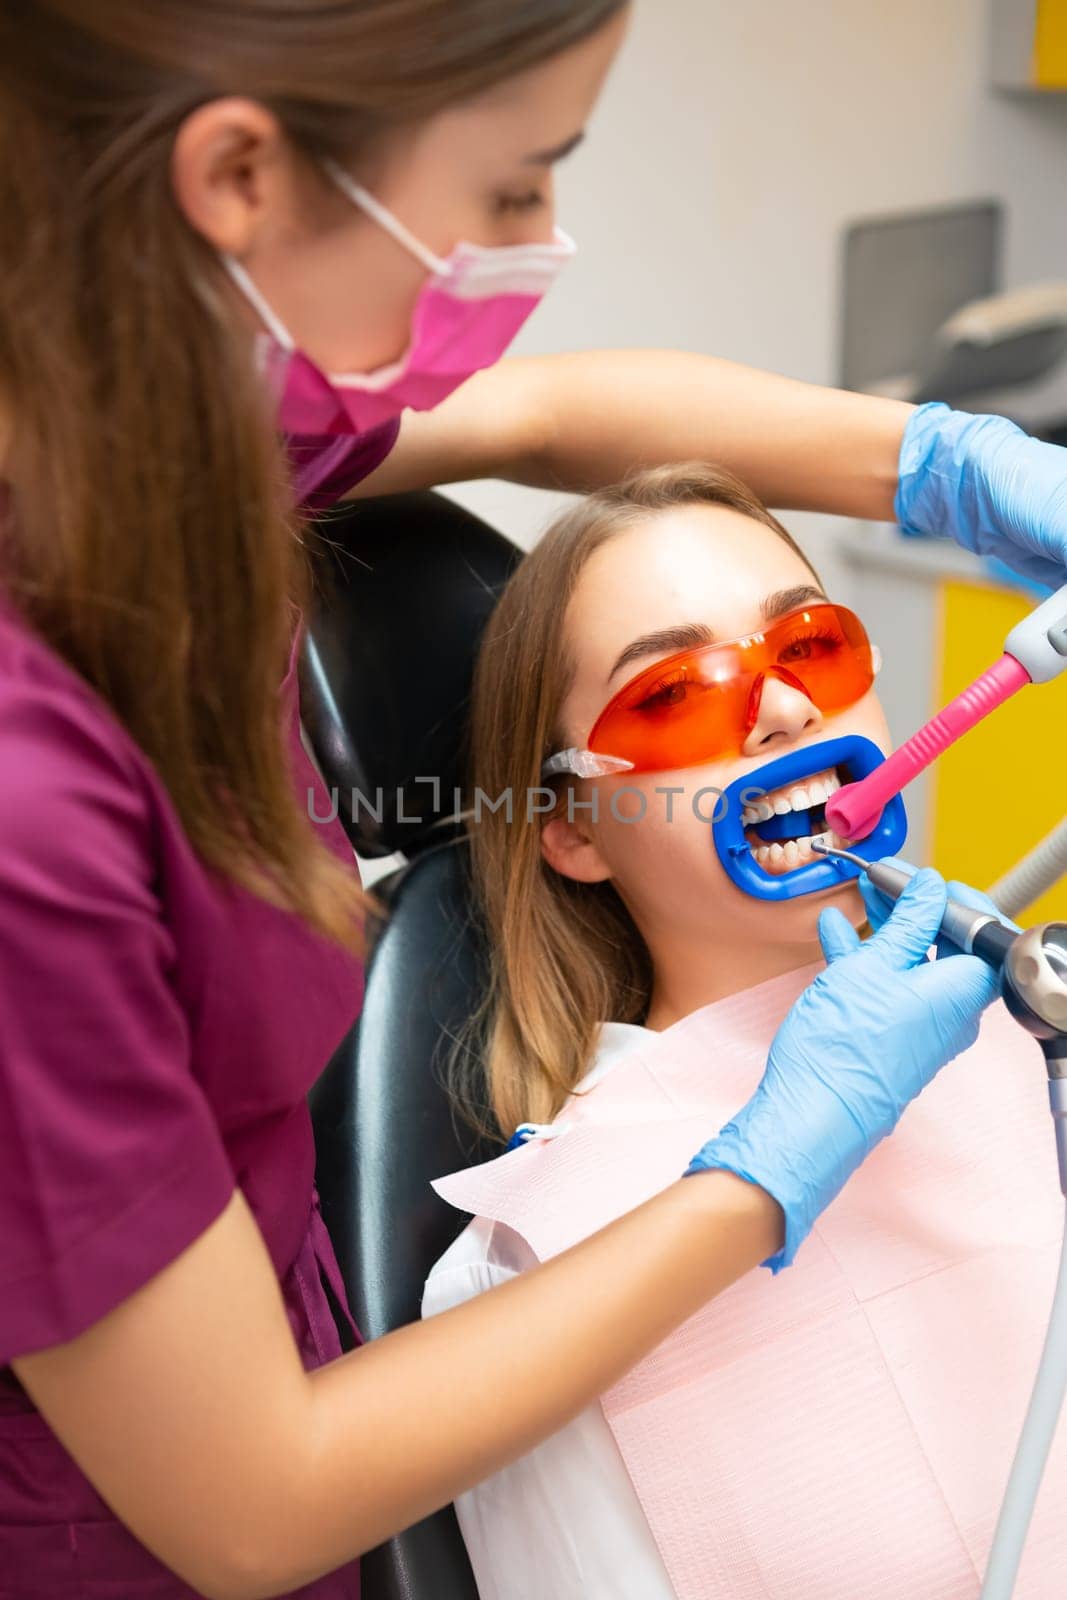 Dentist in gloves performing teeth cleaning from detector by vladimka